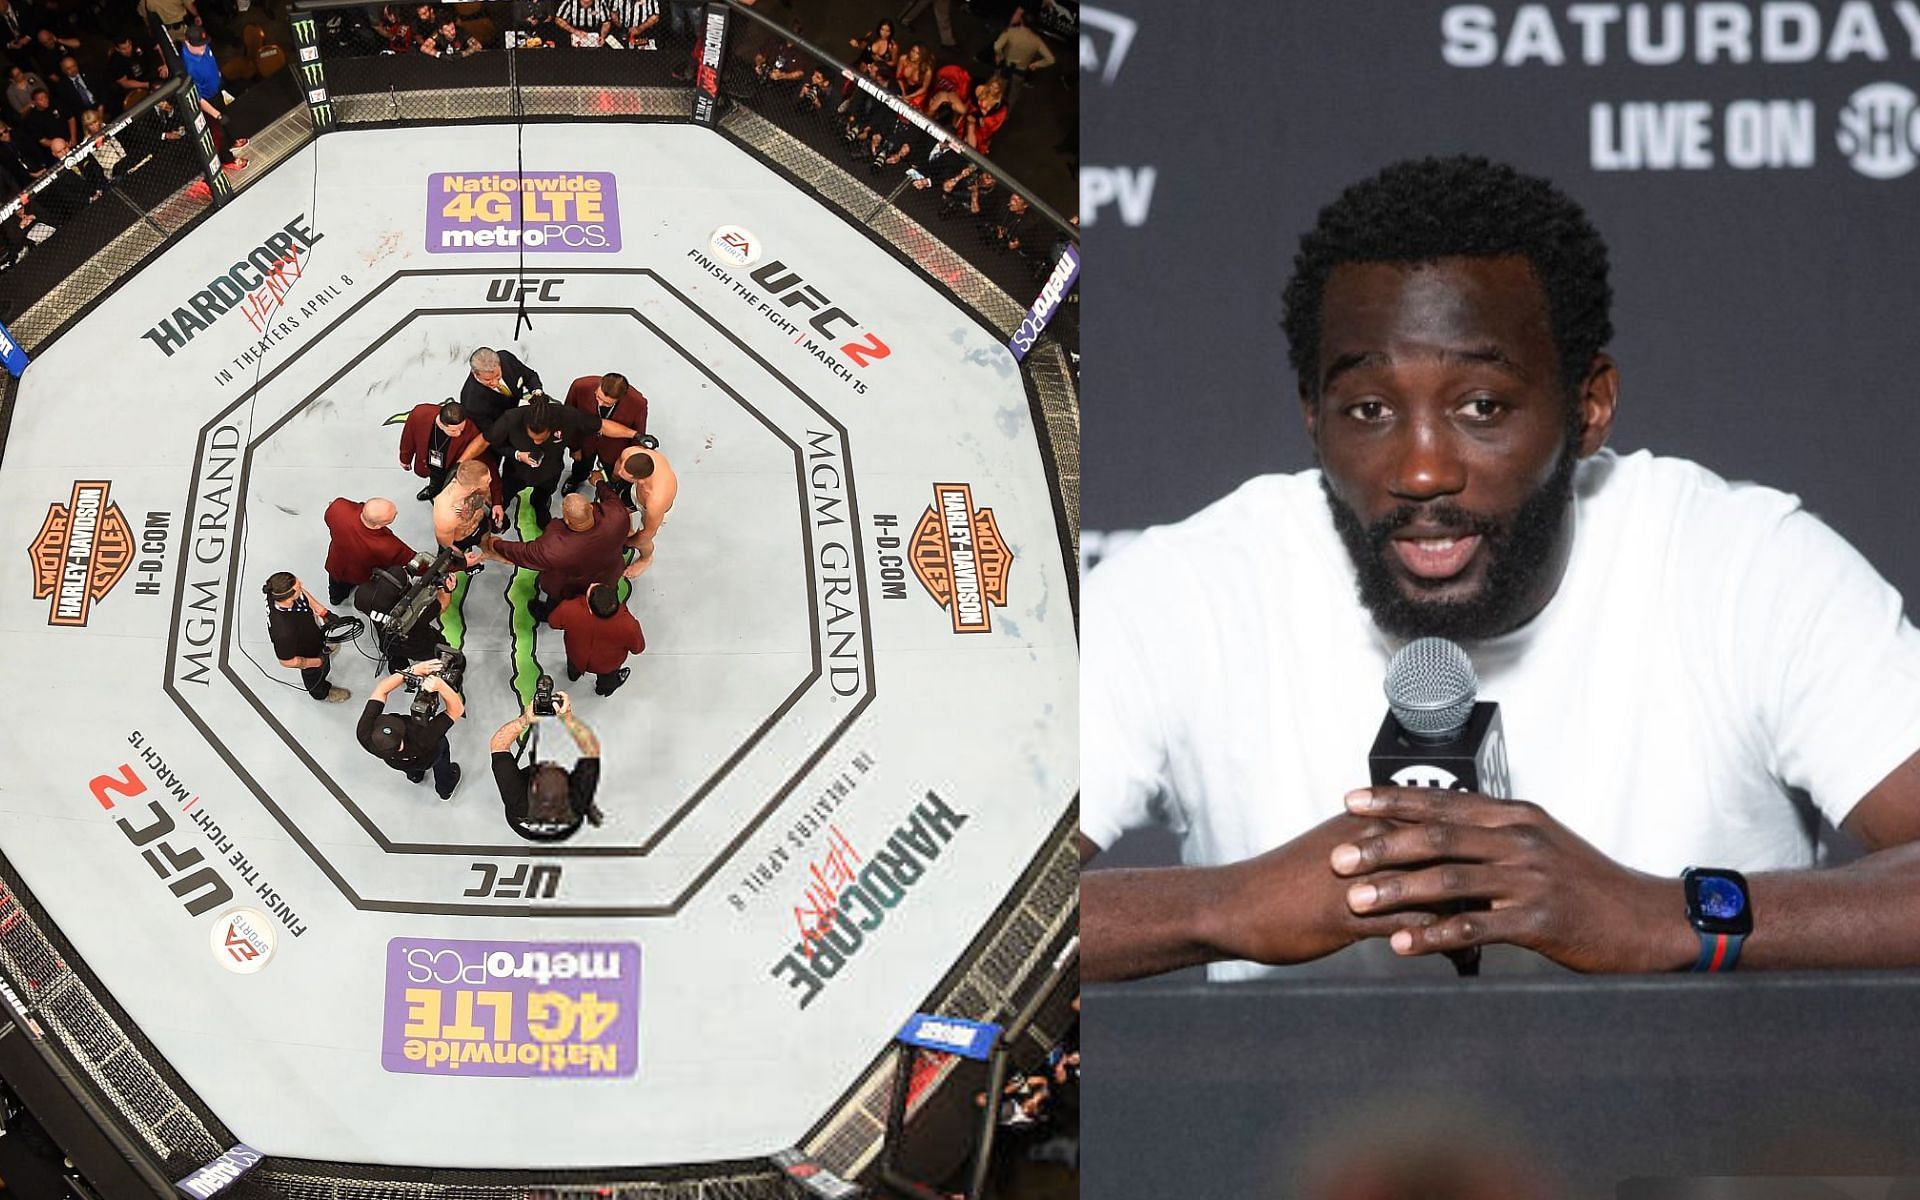 UFC 196 (left) and Terence Crawford (right) [Images Courtesy: @GettyImages]